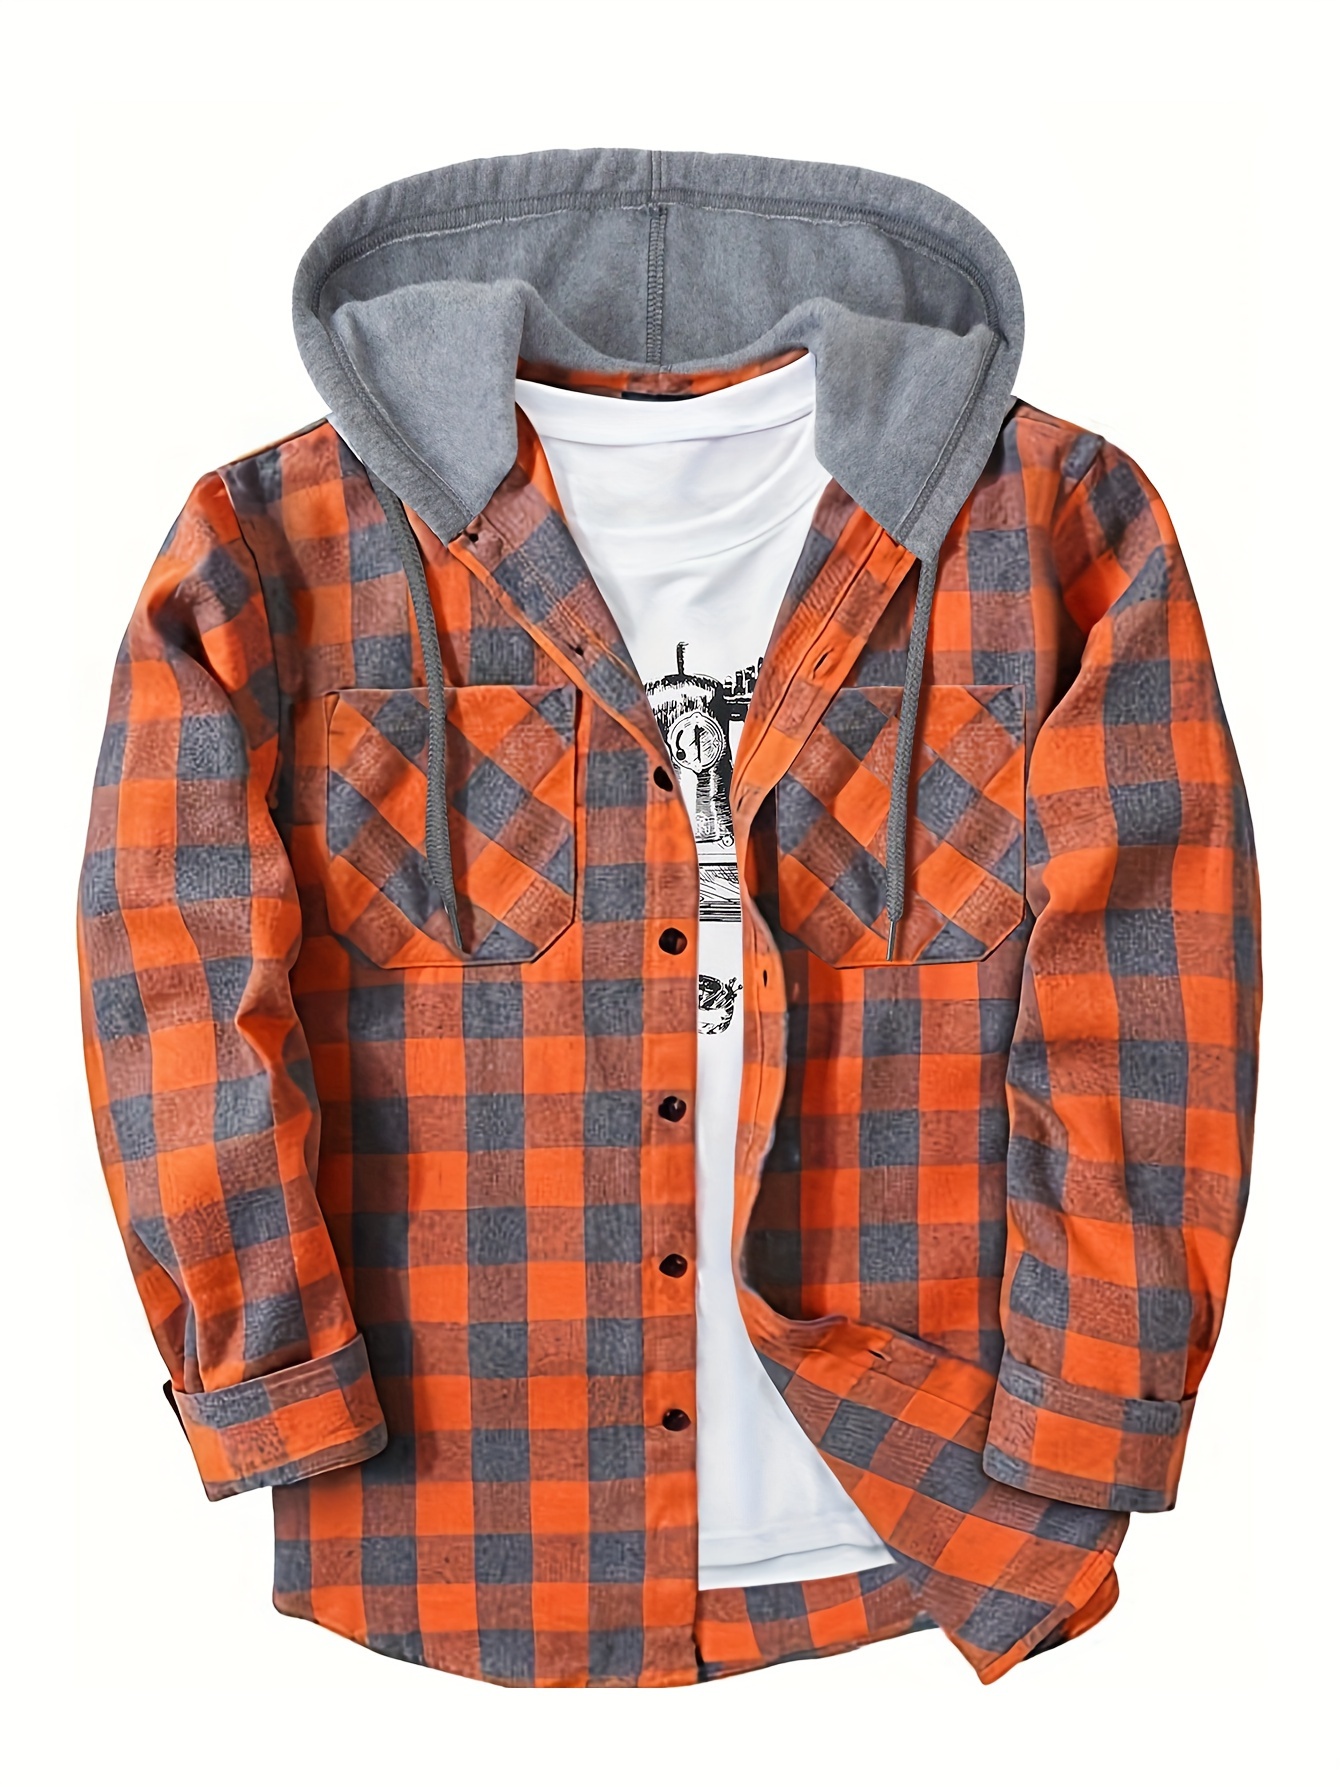 long sleeve casual regular fit button up hooded shirts jacket plaid shirt coat for men details 51